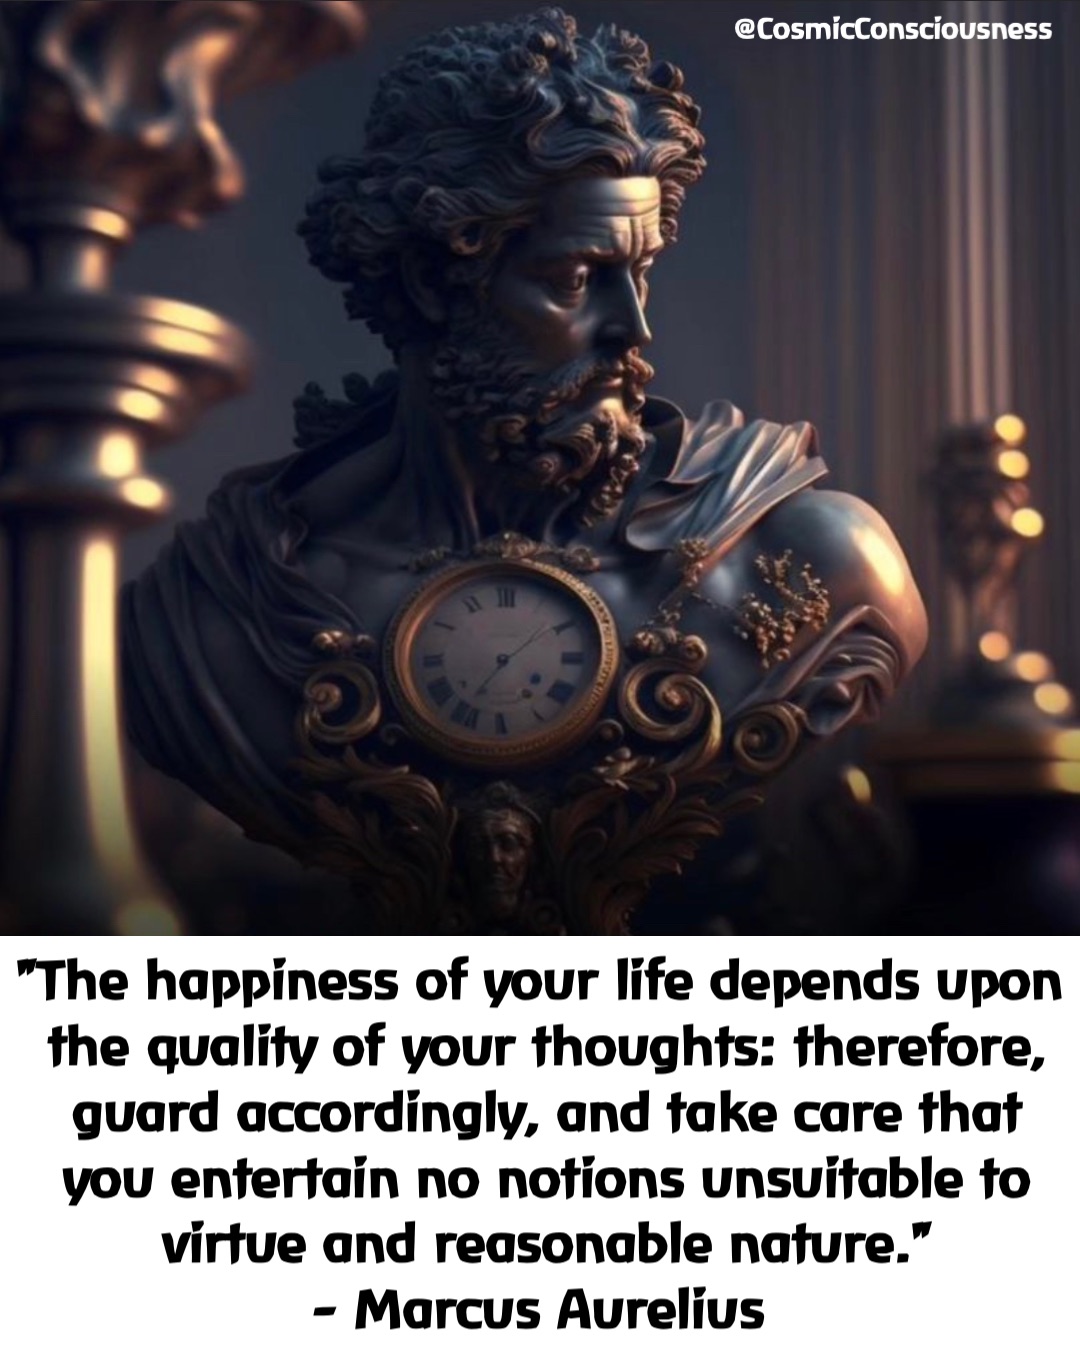 "The happiness of your life depends upon the quality of your thoughts: therefore, guard accordingly, and take care that you entertain no notions unsuitable to virtue and reasonable nature." 
- Marcus Aurelius @CosmicConsciousness